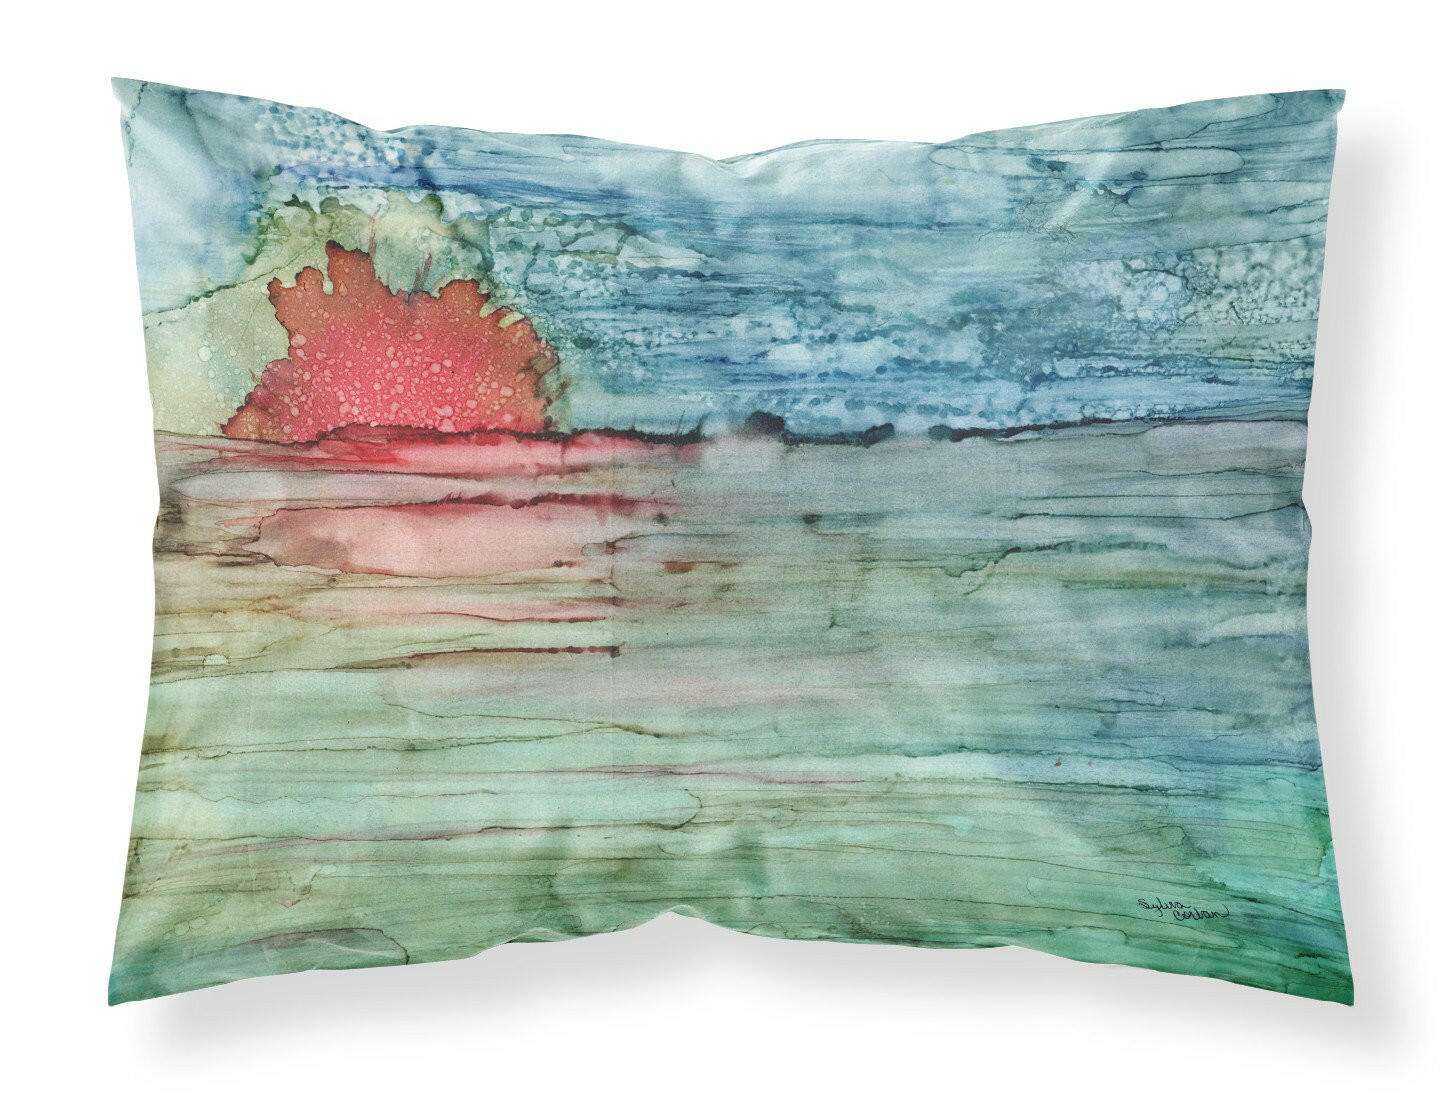 Abstract Sunset on the Water Fabric Standard Pillowcase 8984PILLOWCASE by Caroline's Treasures